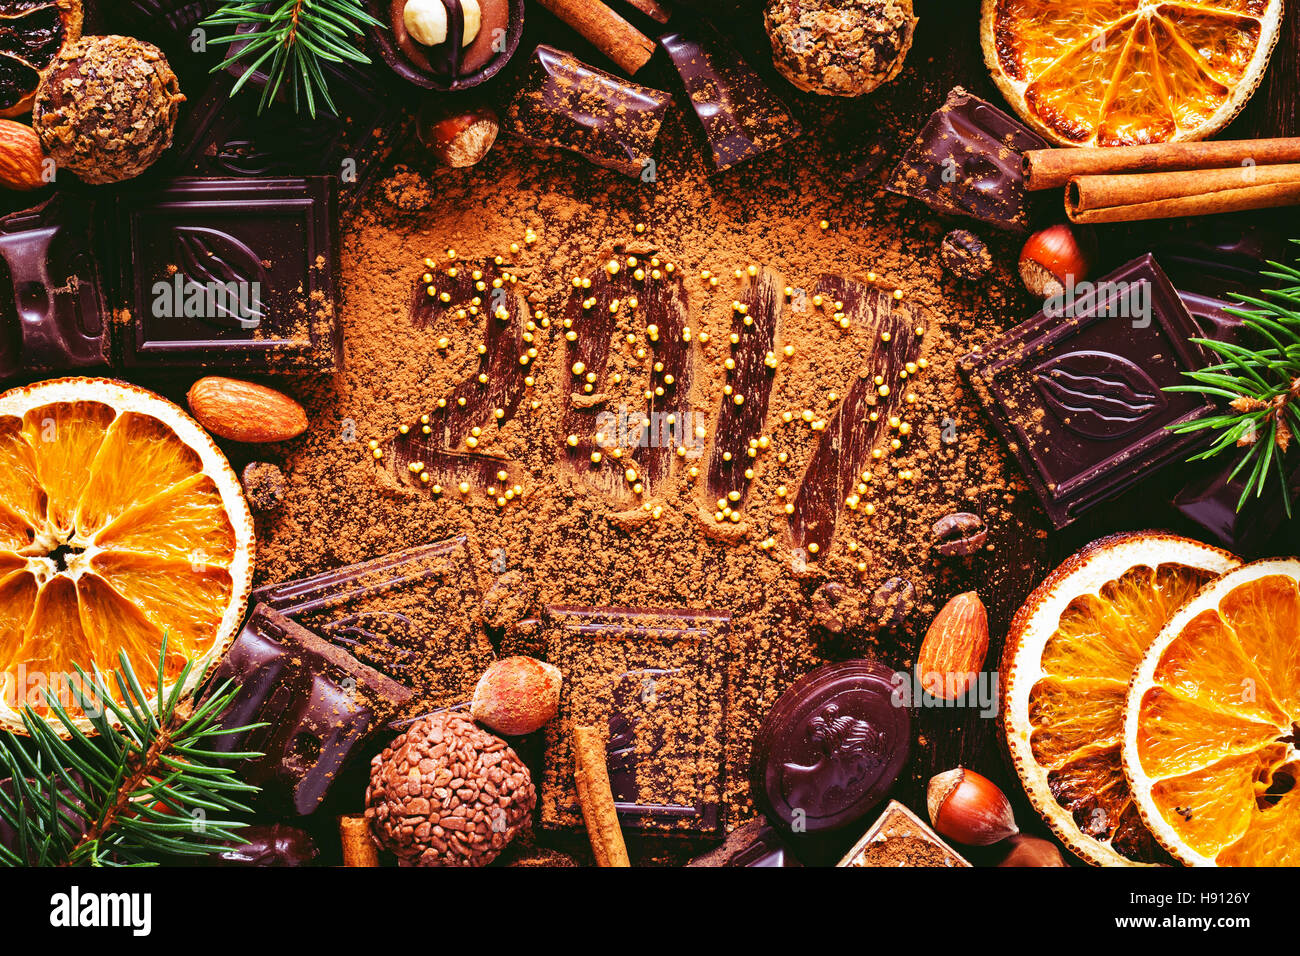 Greeting card for 2017 New Year! Chocolates, sweets, dried orange rings, nuts, spices and fir tree branches. Top view Stock Photo